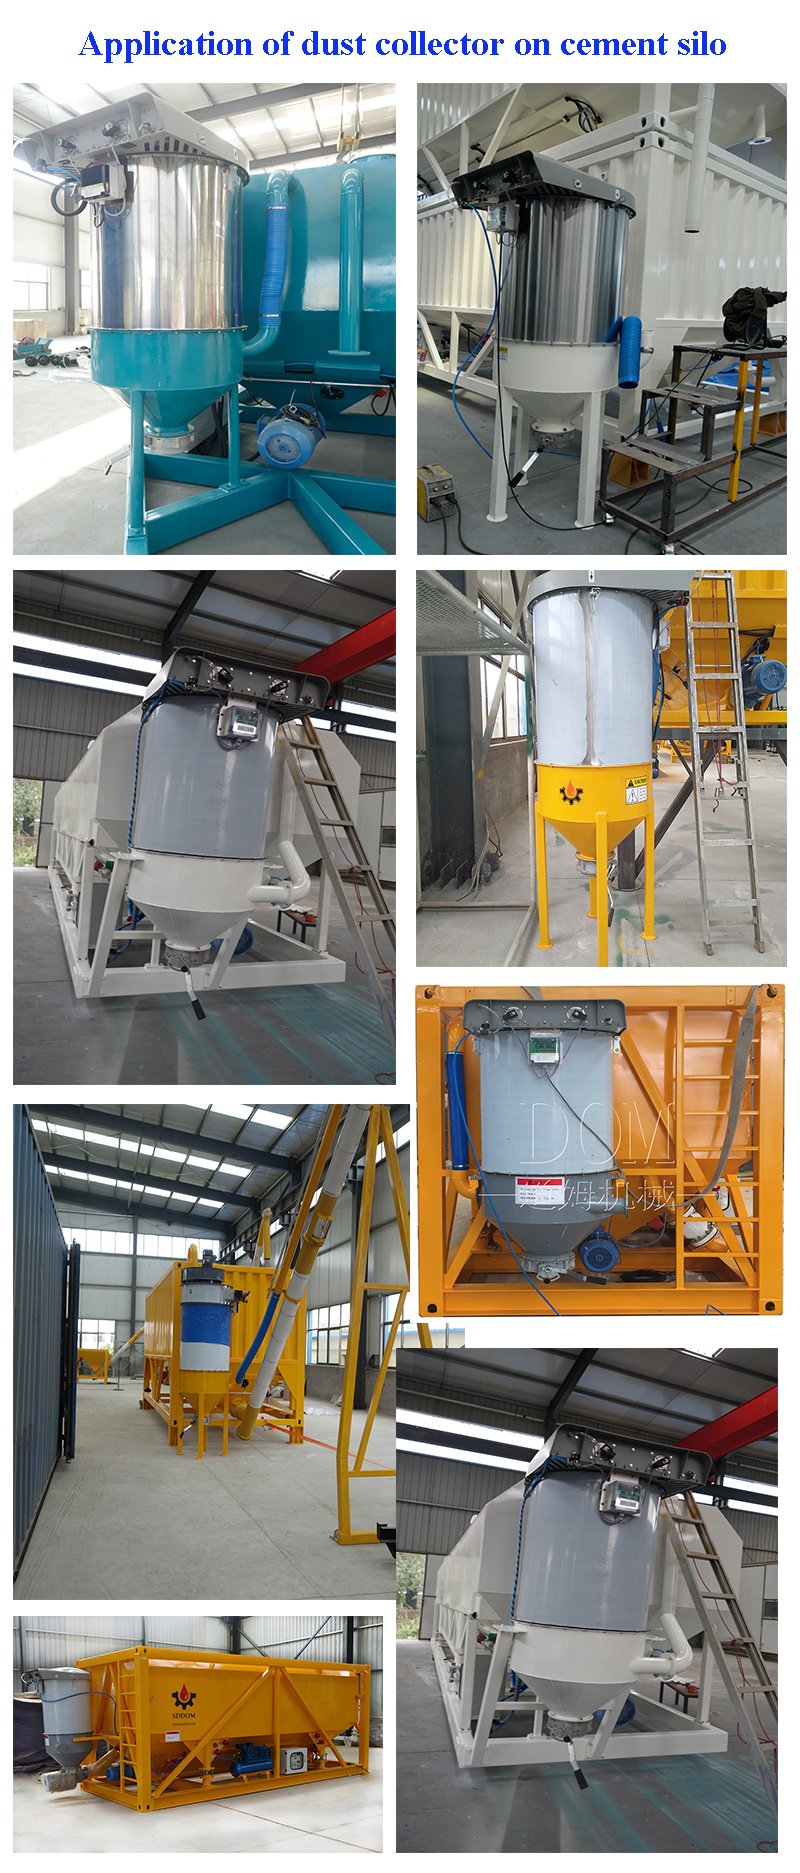 Cyclone Dust Collector with Dust Collector Filter Bag